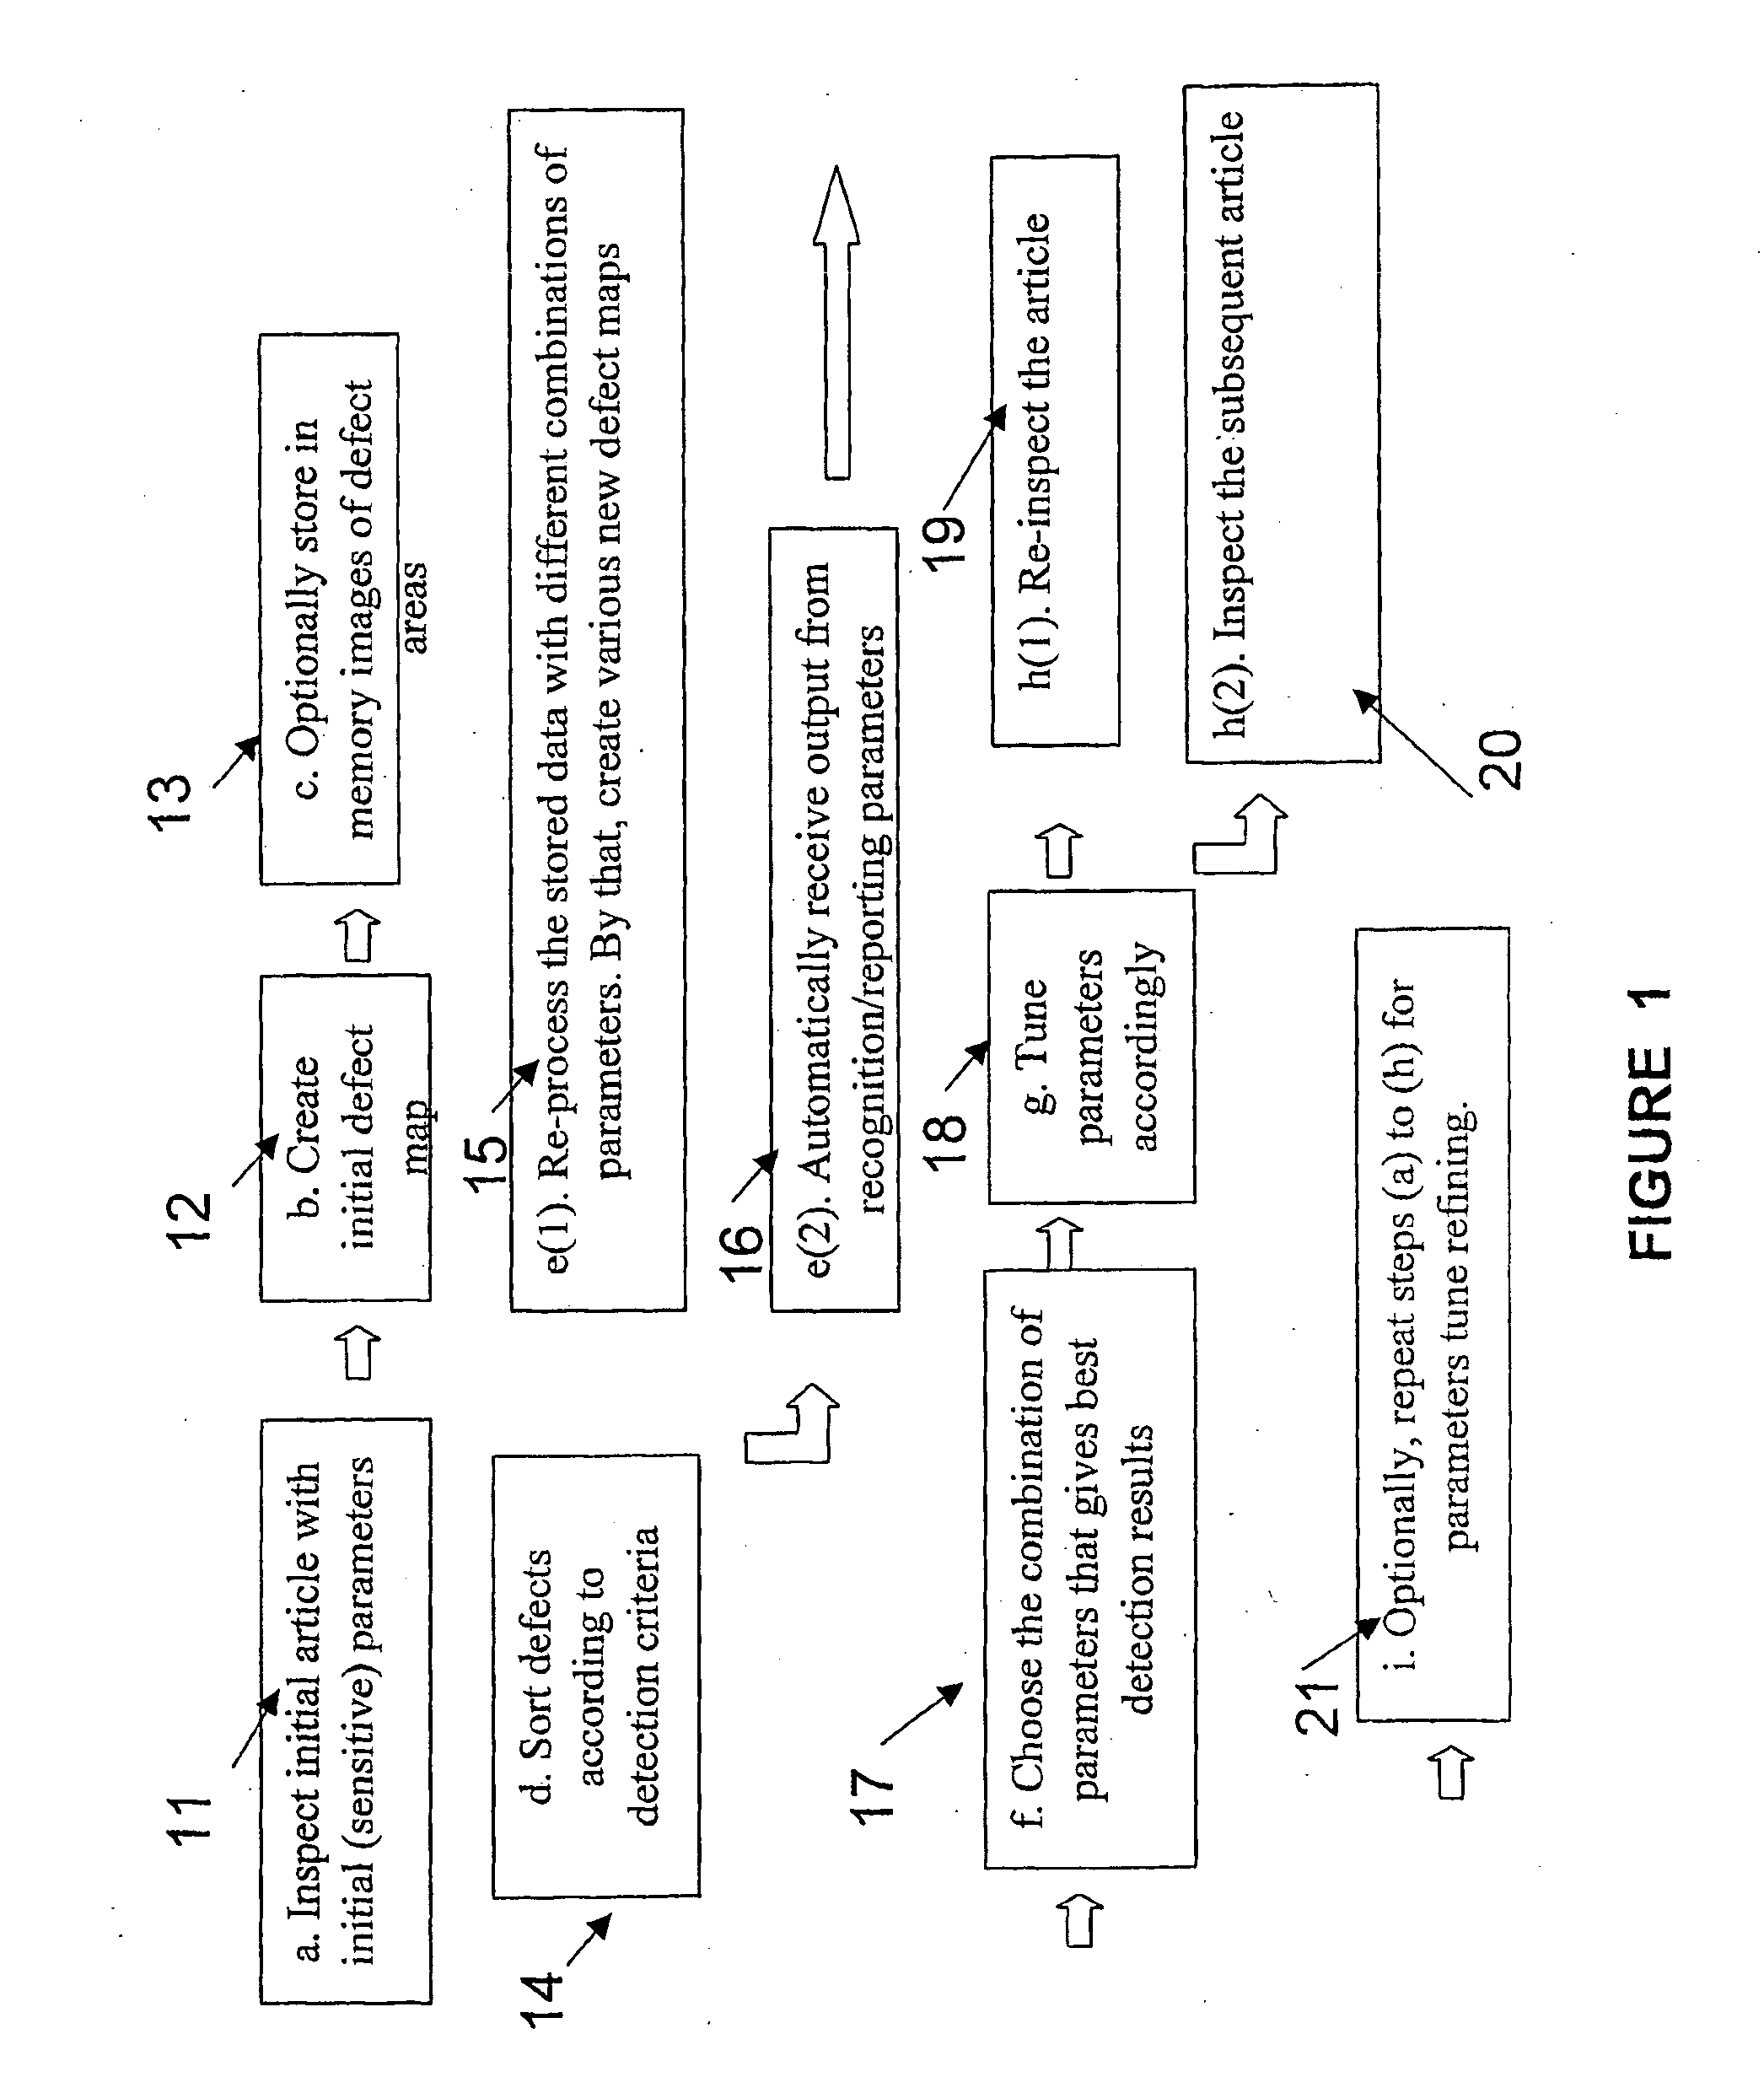 Method and System for Automatic Defect Detection of Articles in Visual Inspection Machines